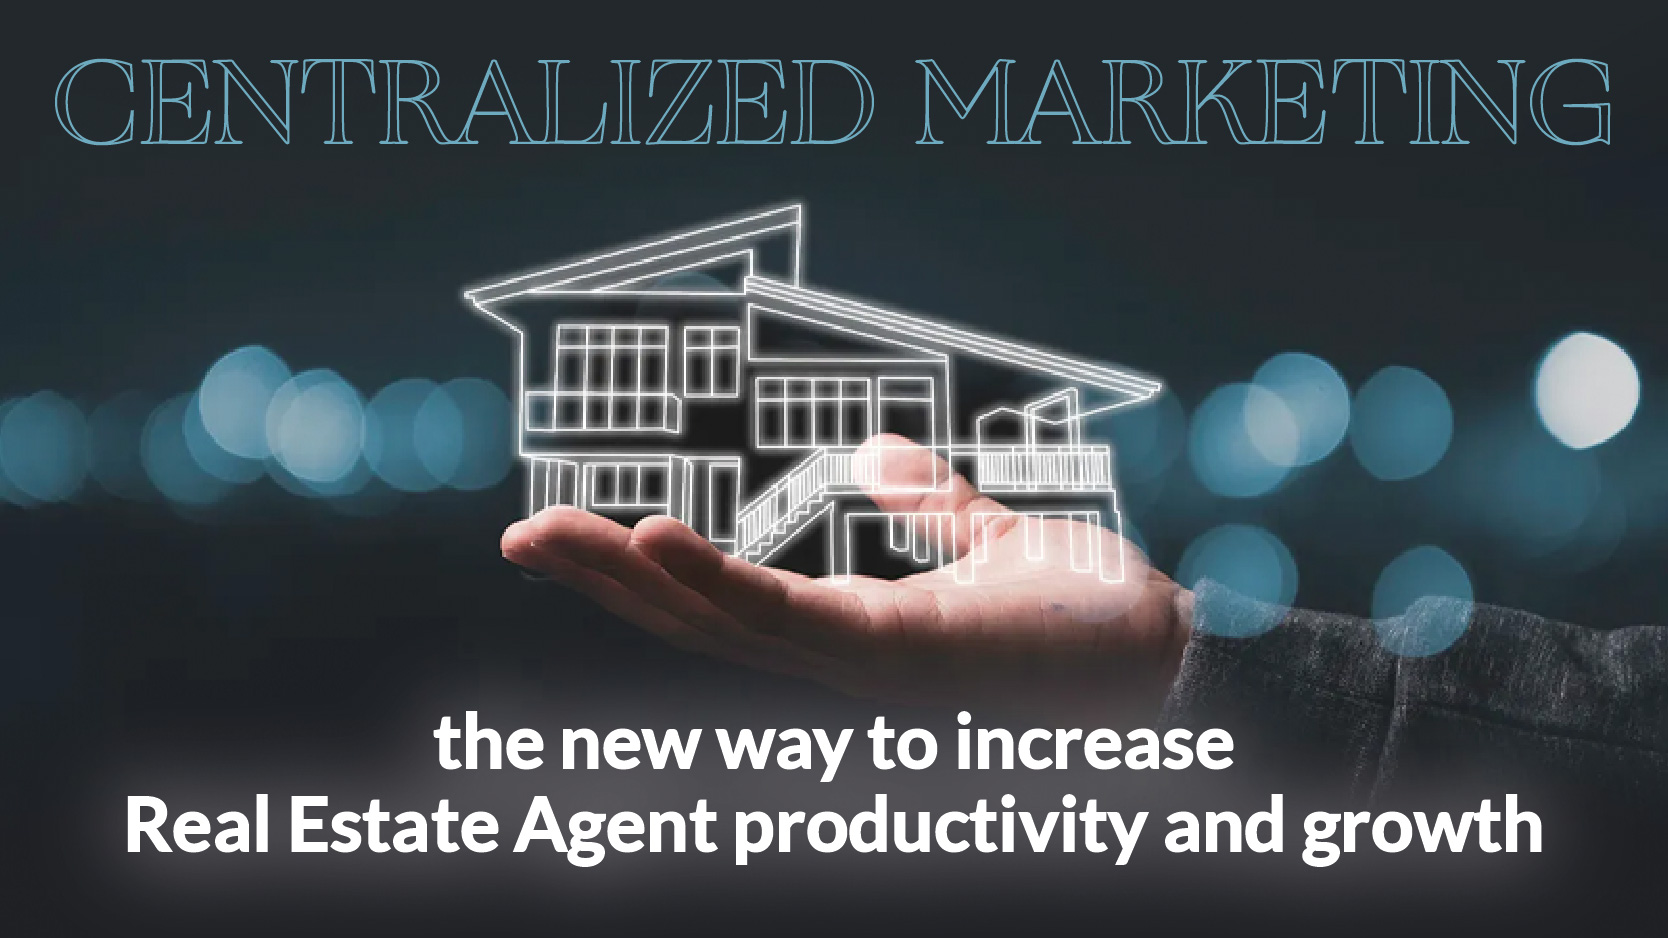 Centralized Marketing the new way to increase Real Estate Agent productivity and growth 